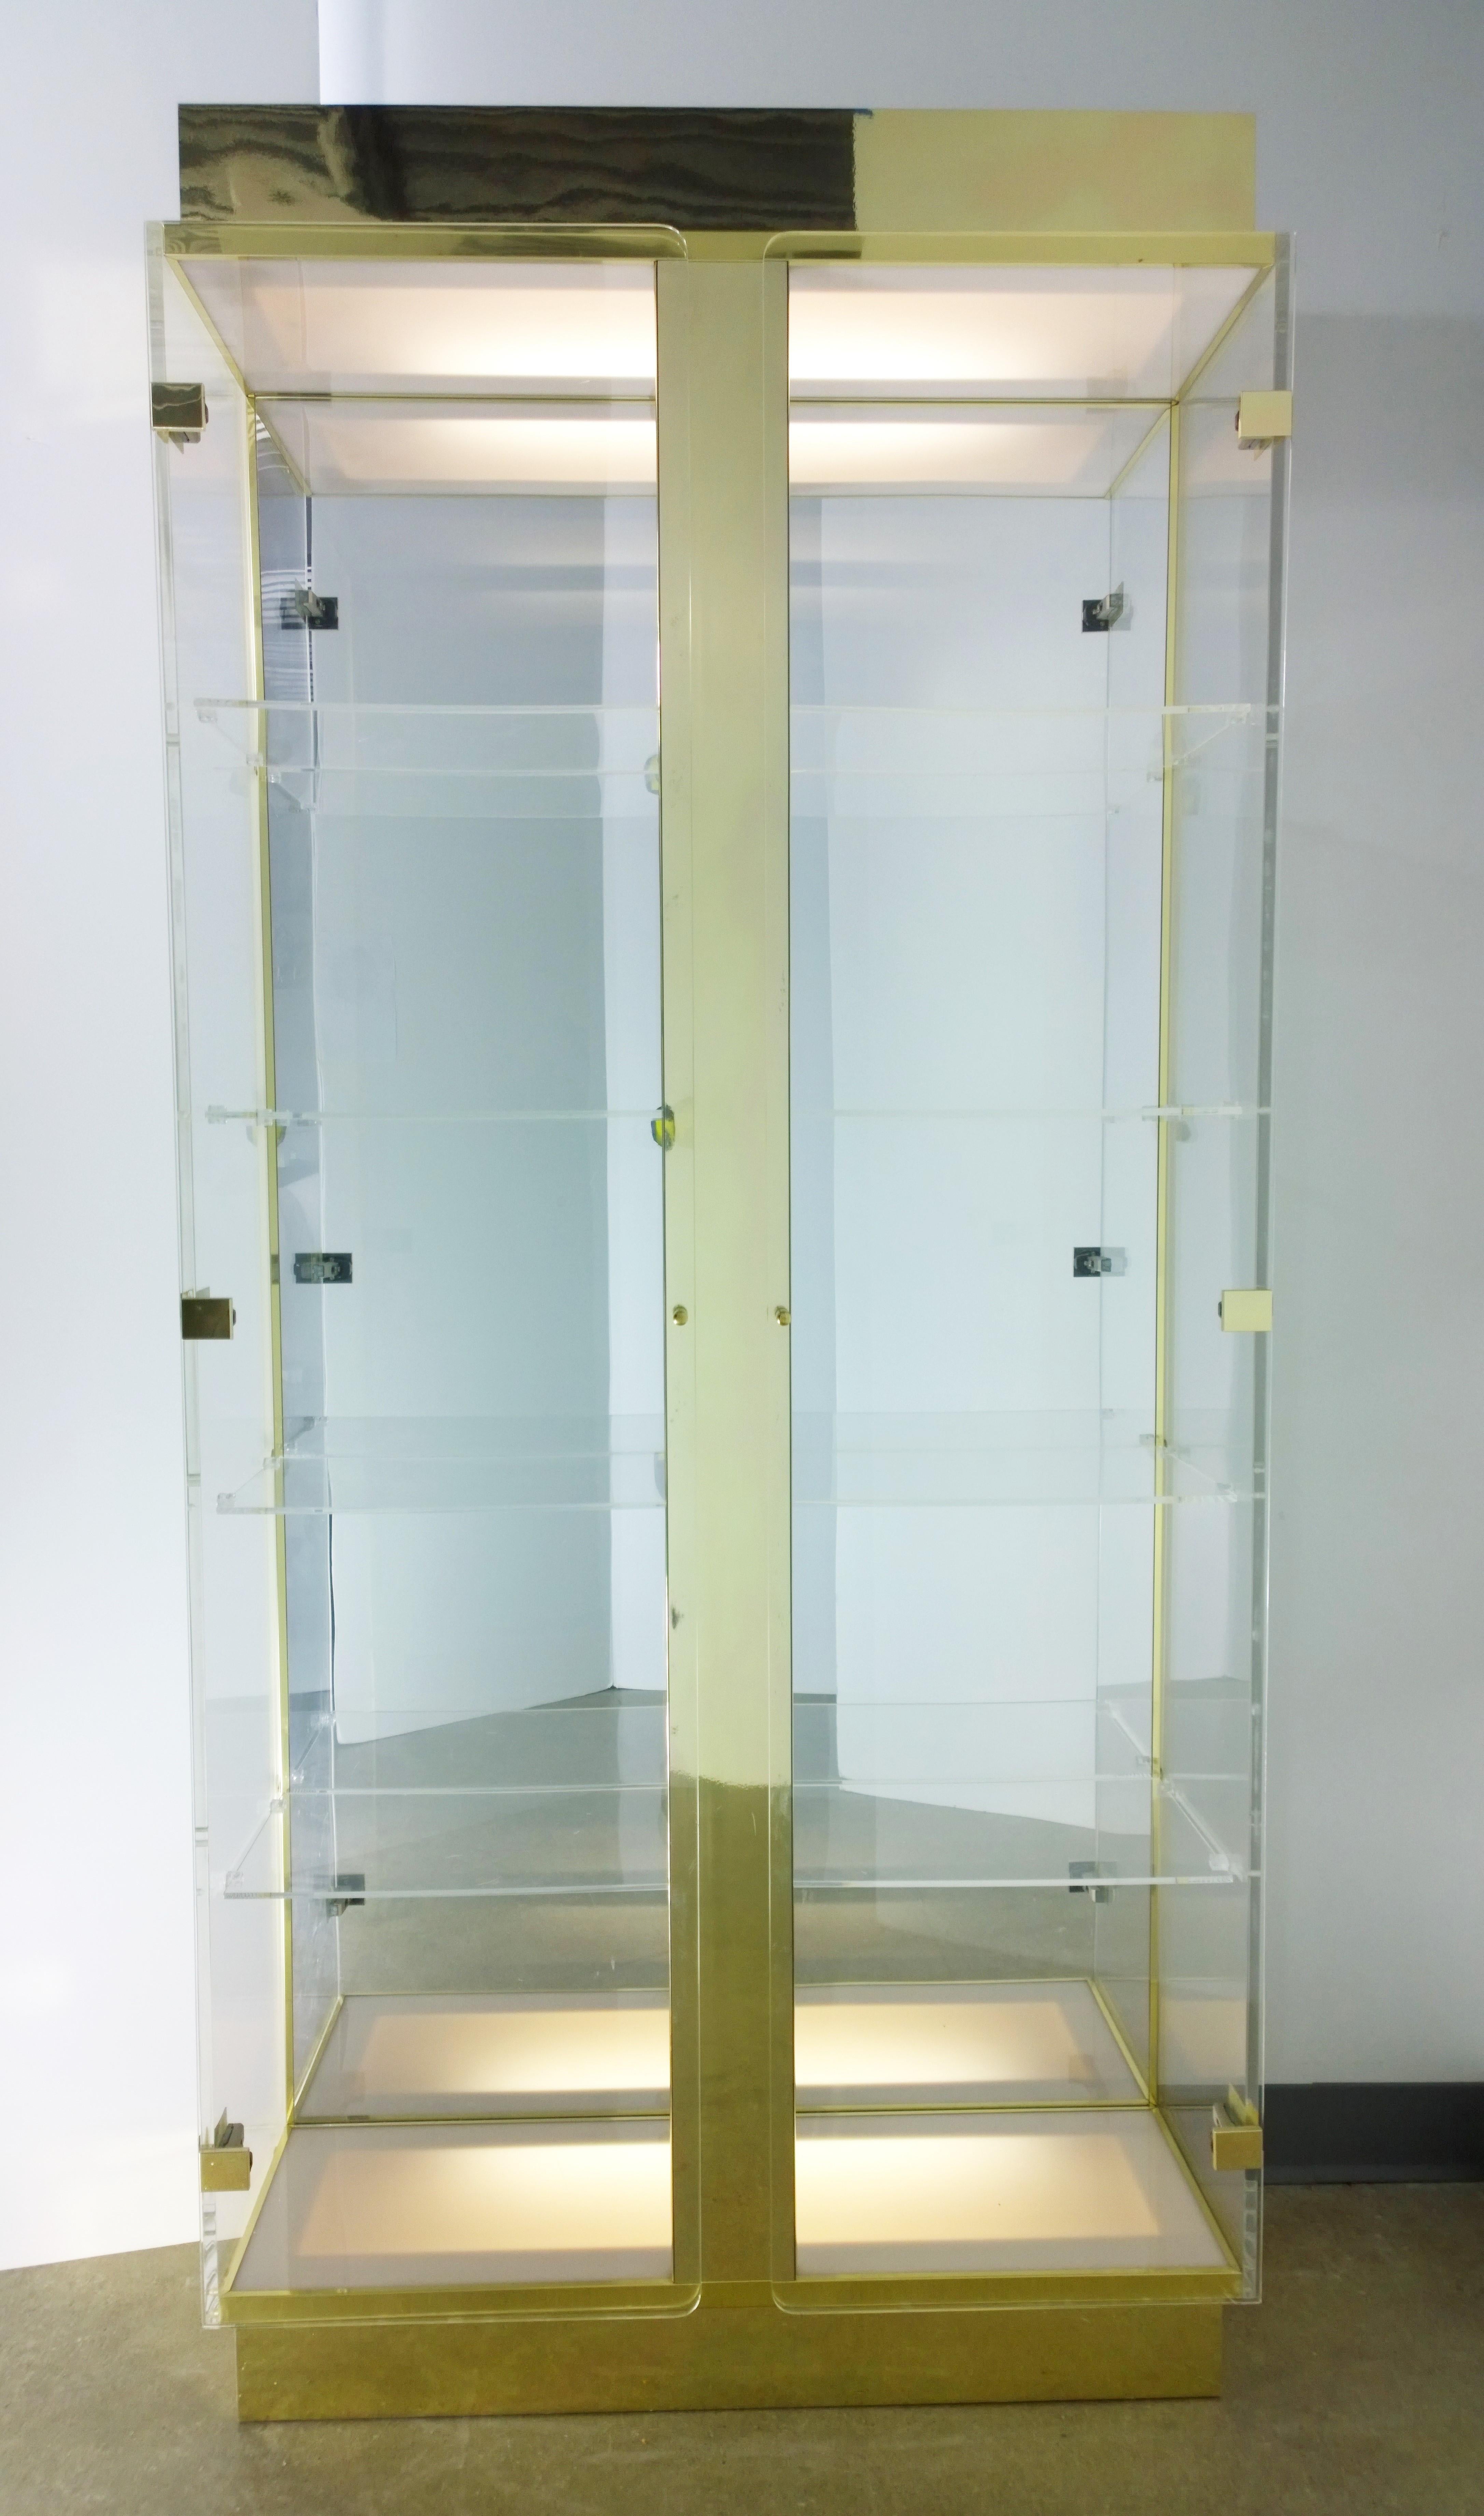 Offered is a Mid-Century Modern five Lucite shelves, Lucite supports, two Lucite doors, mirrored plastic, enameled gold plastic, brass over wood frame with upper and lower lighting. The sides and doors of this fabulous piece is made of Lucite. The